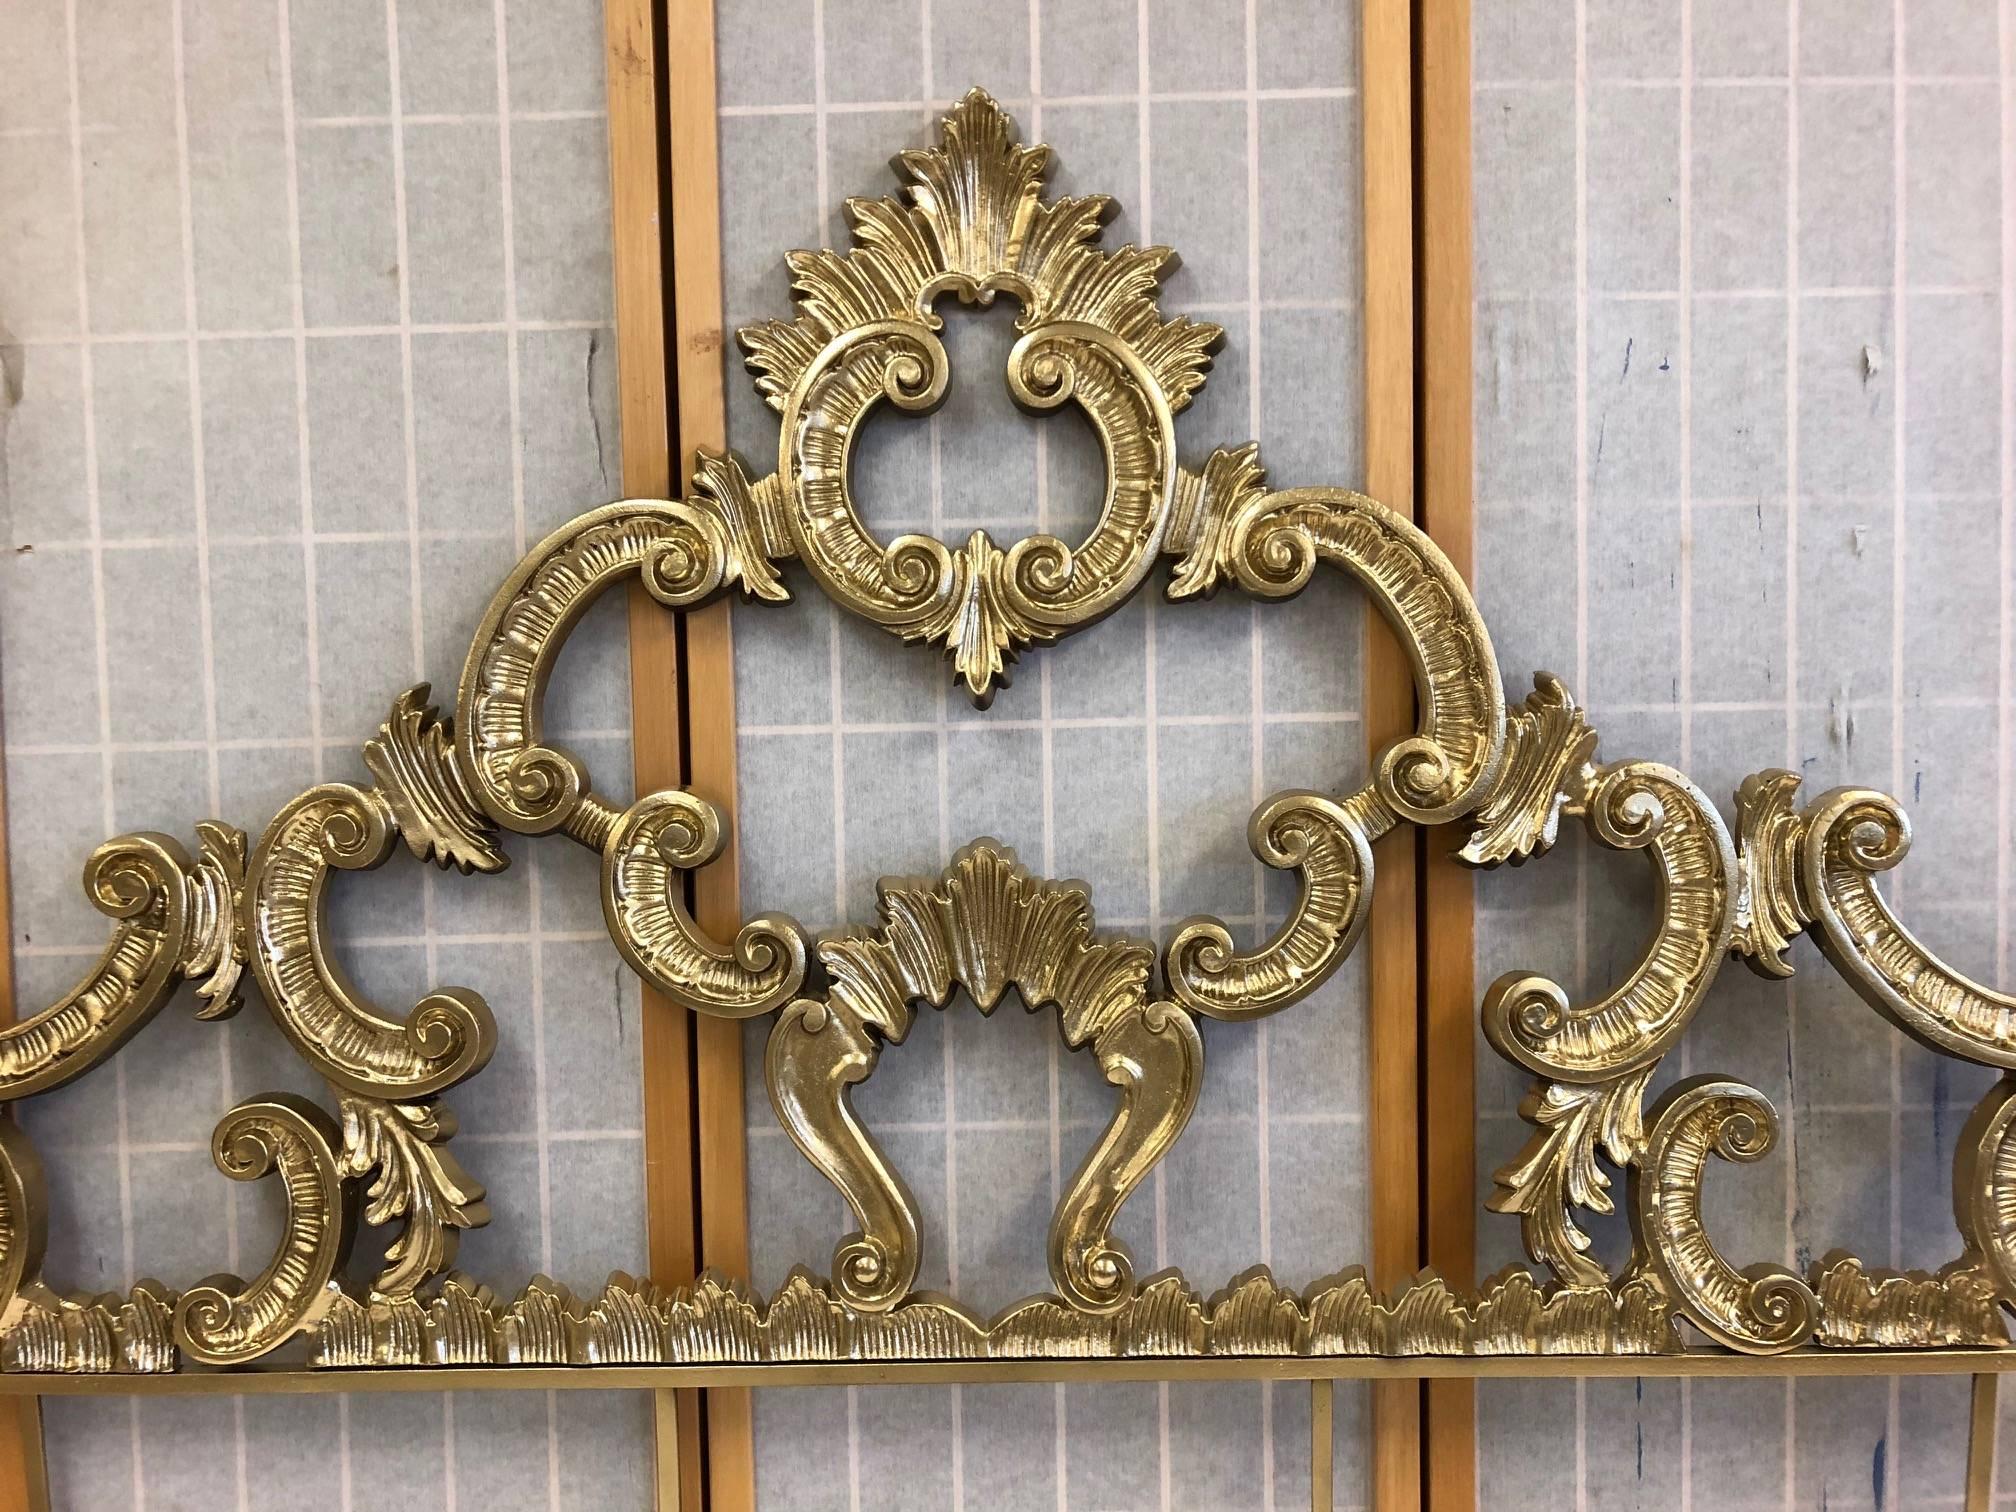 1950s Rococo style headboard that is gold painted metal finish. Has a wonderful decorative pattern. Overall measures: 55 H x 60 W. From hole to hole the width is approximate 58 W.